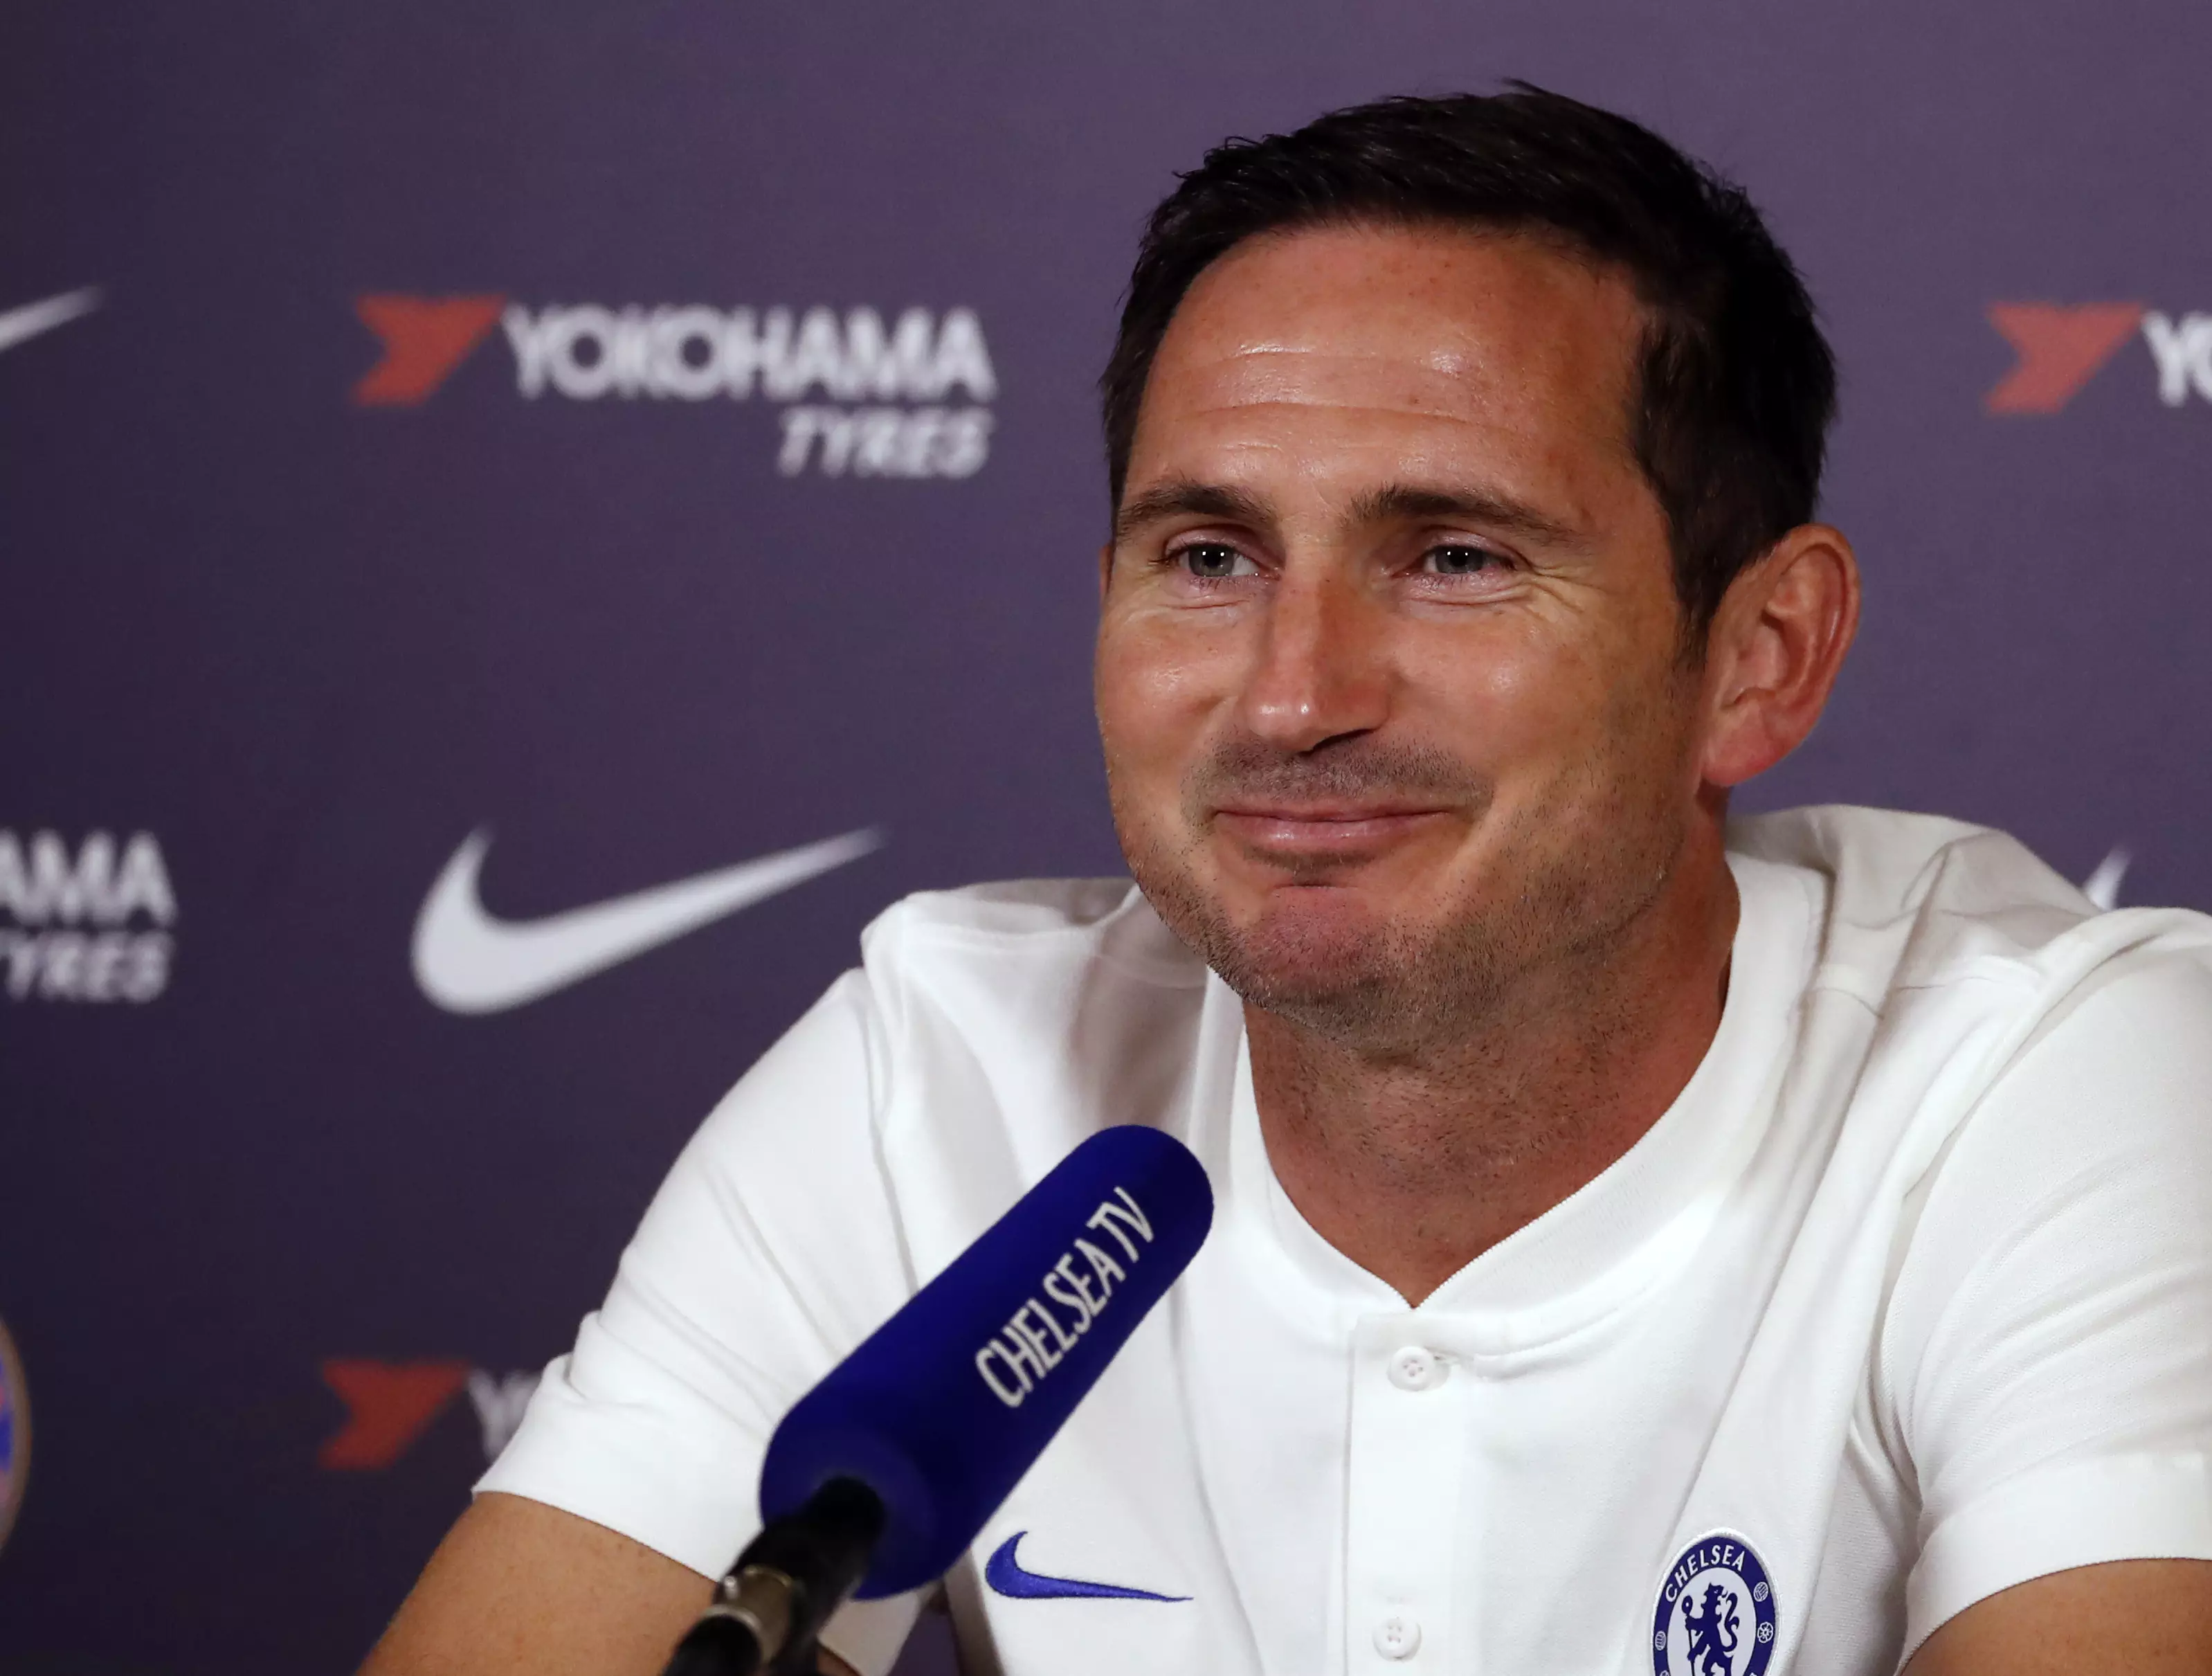 Lampard is extremely happy to be in the role at Chelsea. Image: PA Images